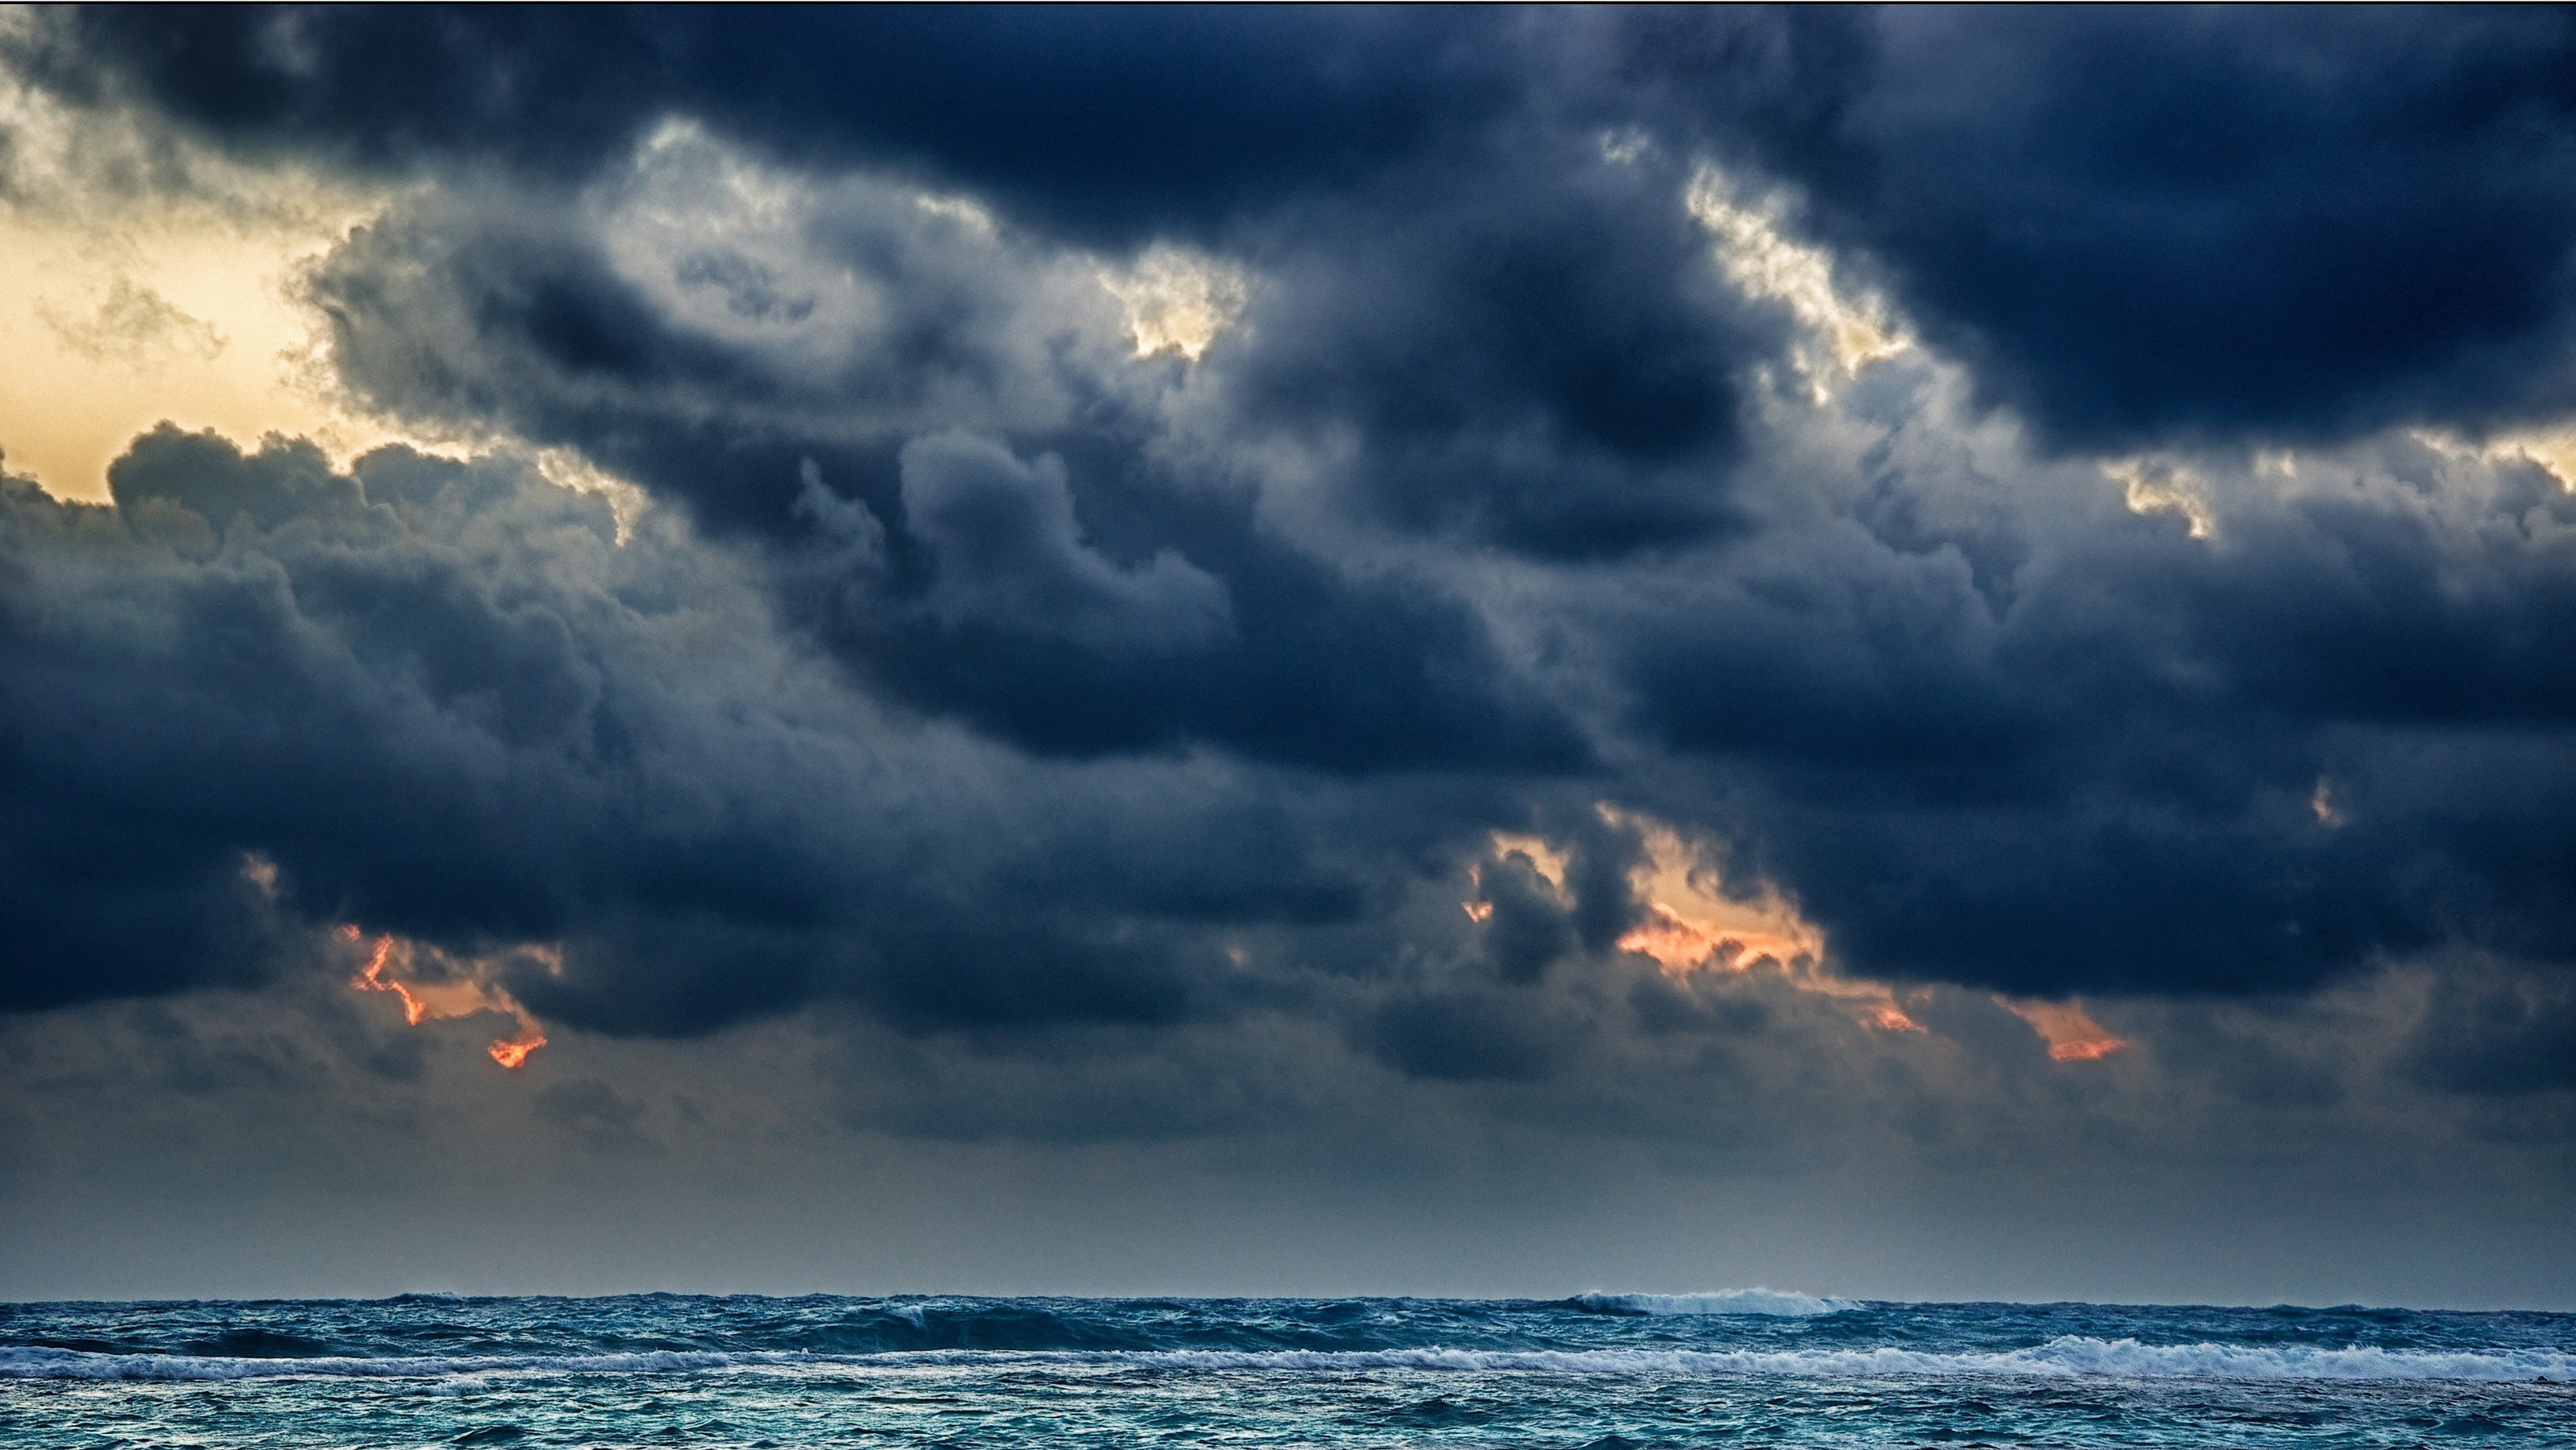 3200x1801 Wallpaper Clouds, Sea, Storm, Gloomy, Heavy, Elements HD, Picture, Image